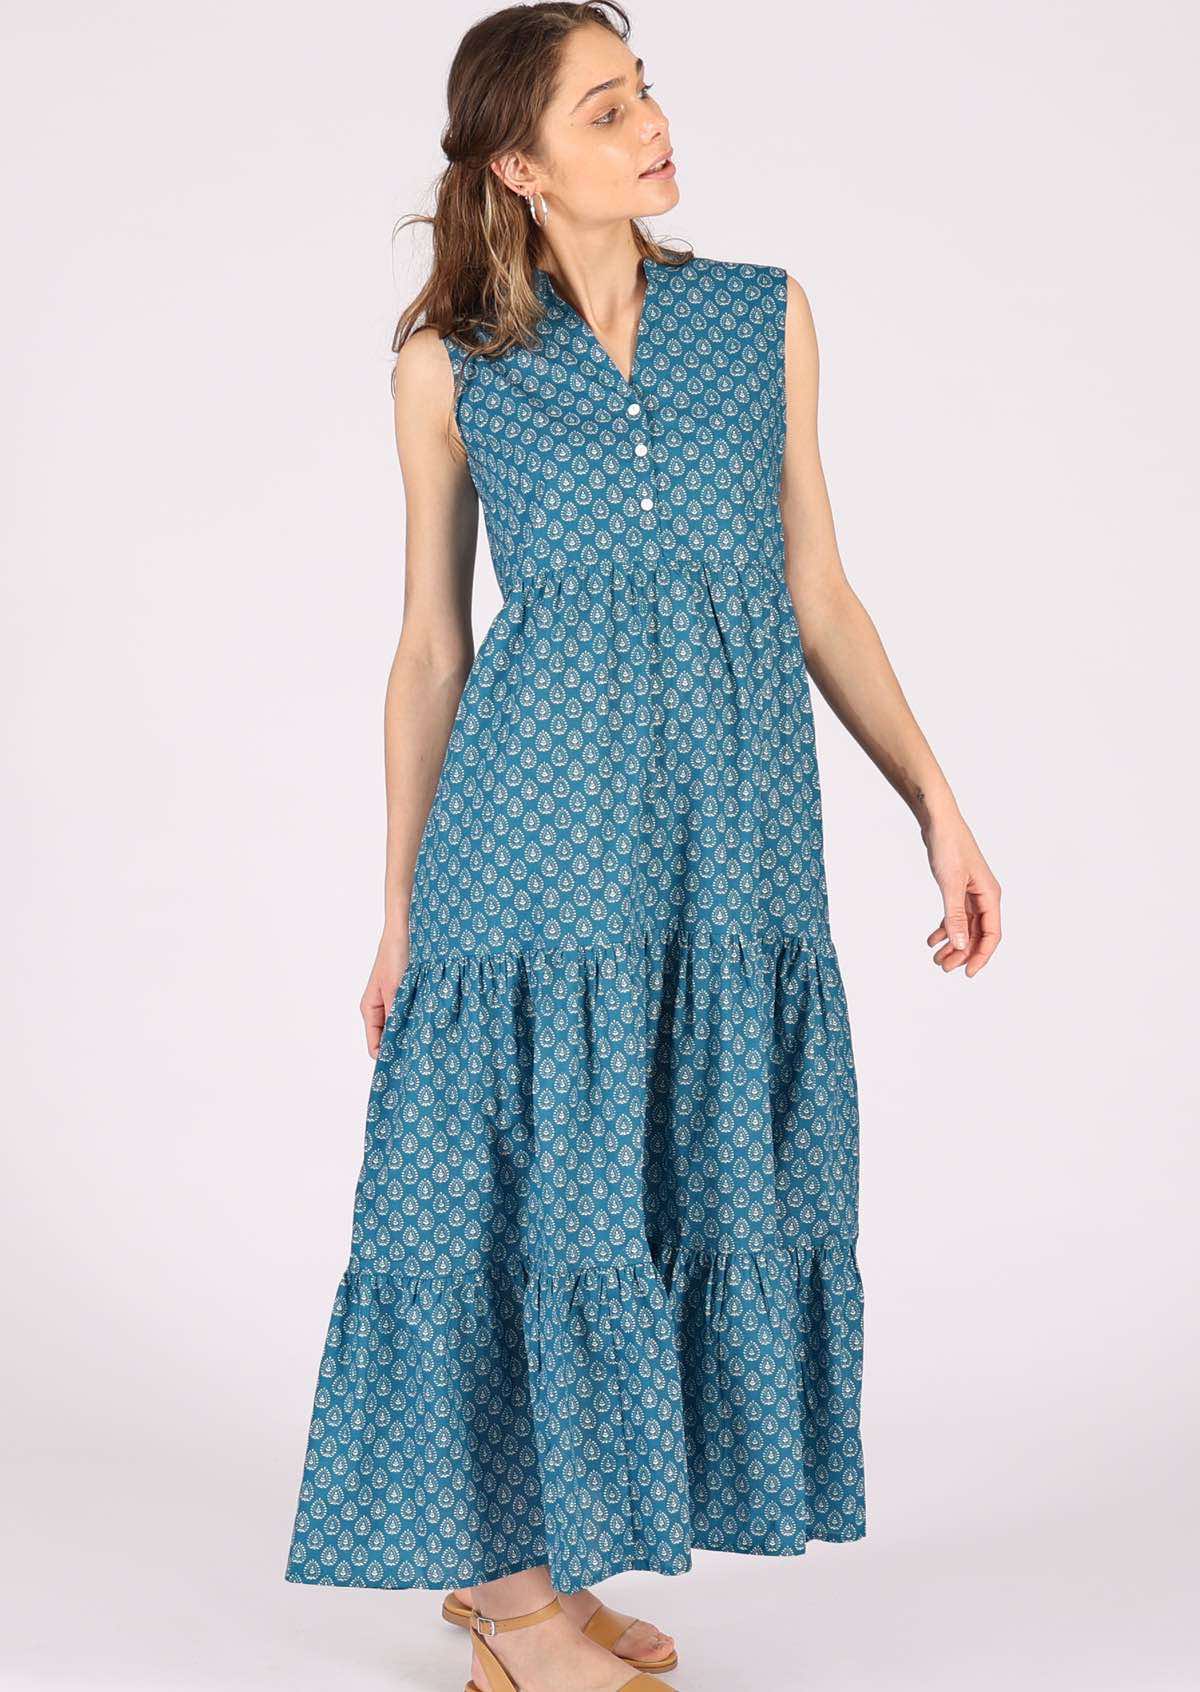 Sleeveless cotton maxi dress with 3 buttons on bodice